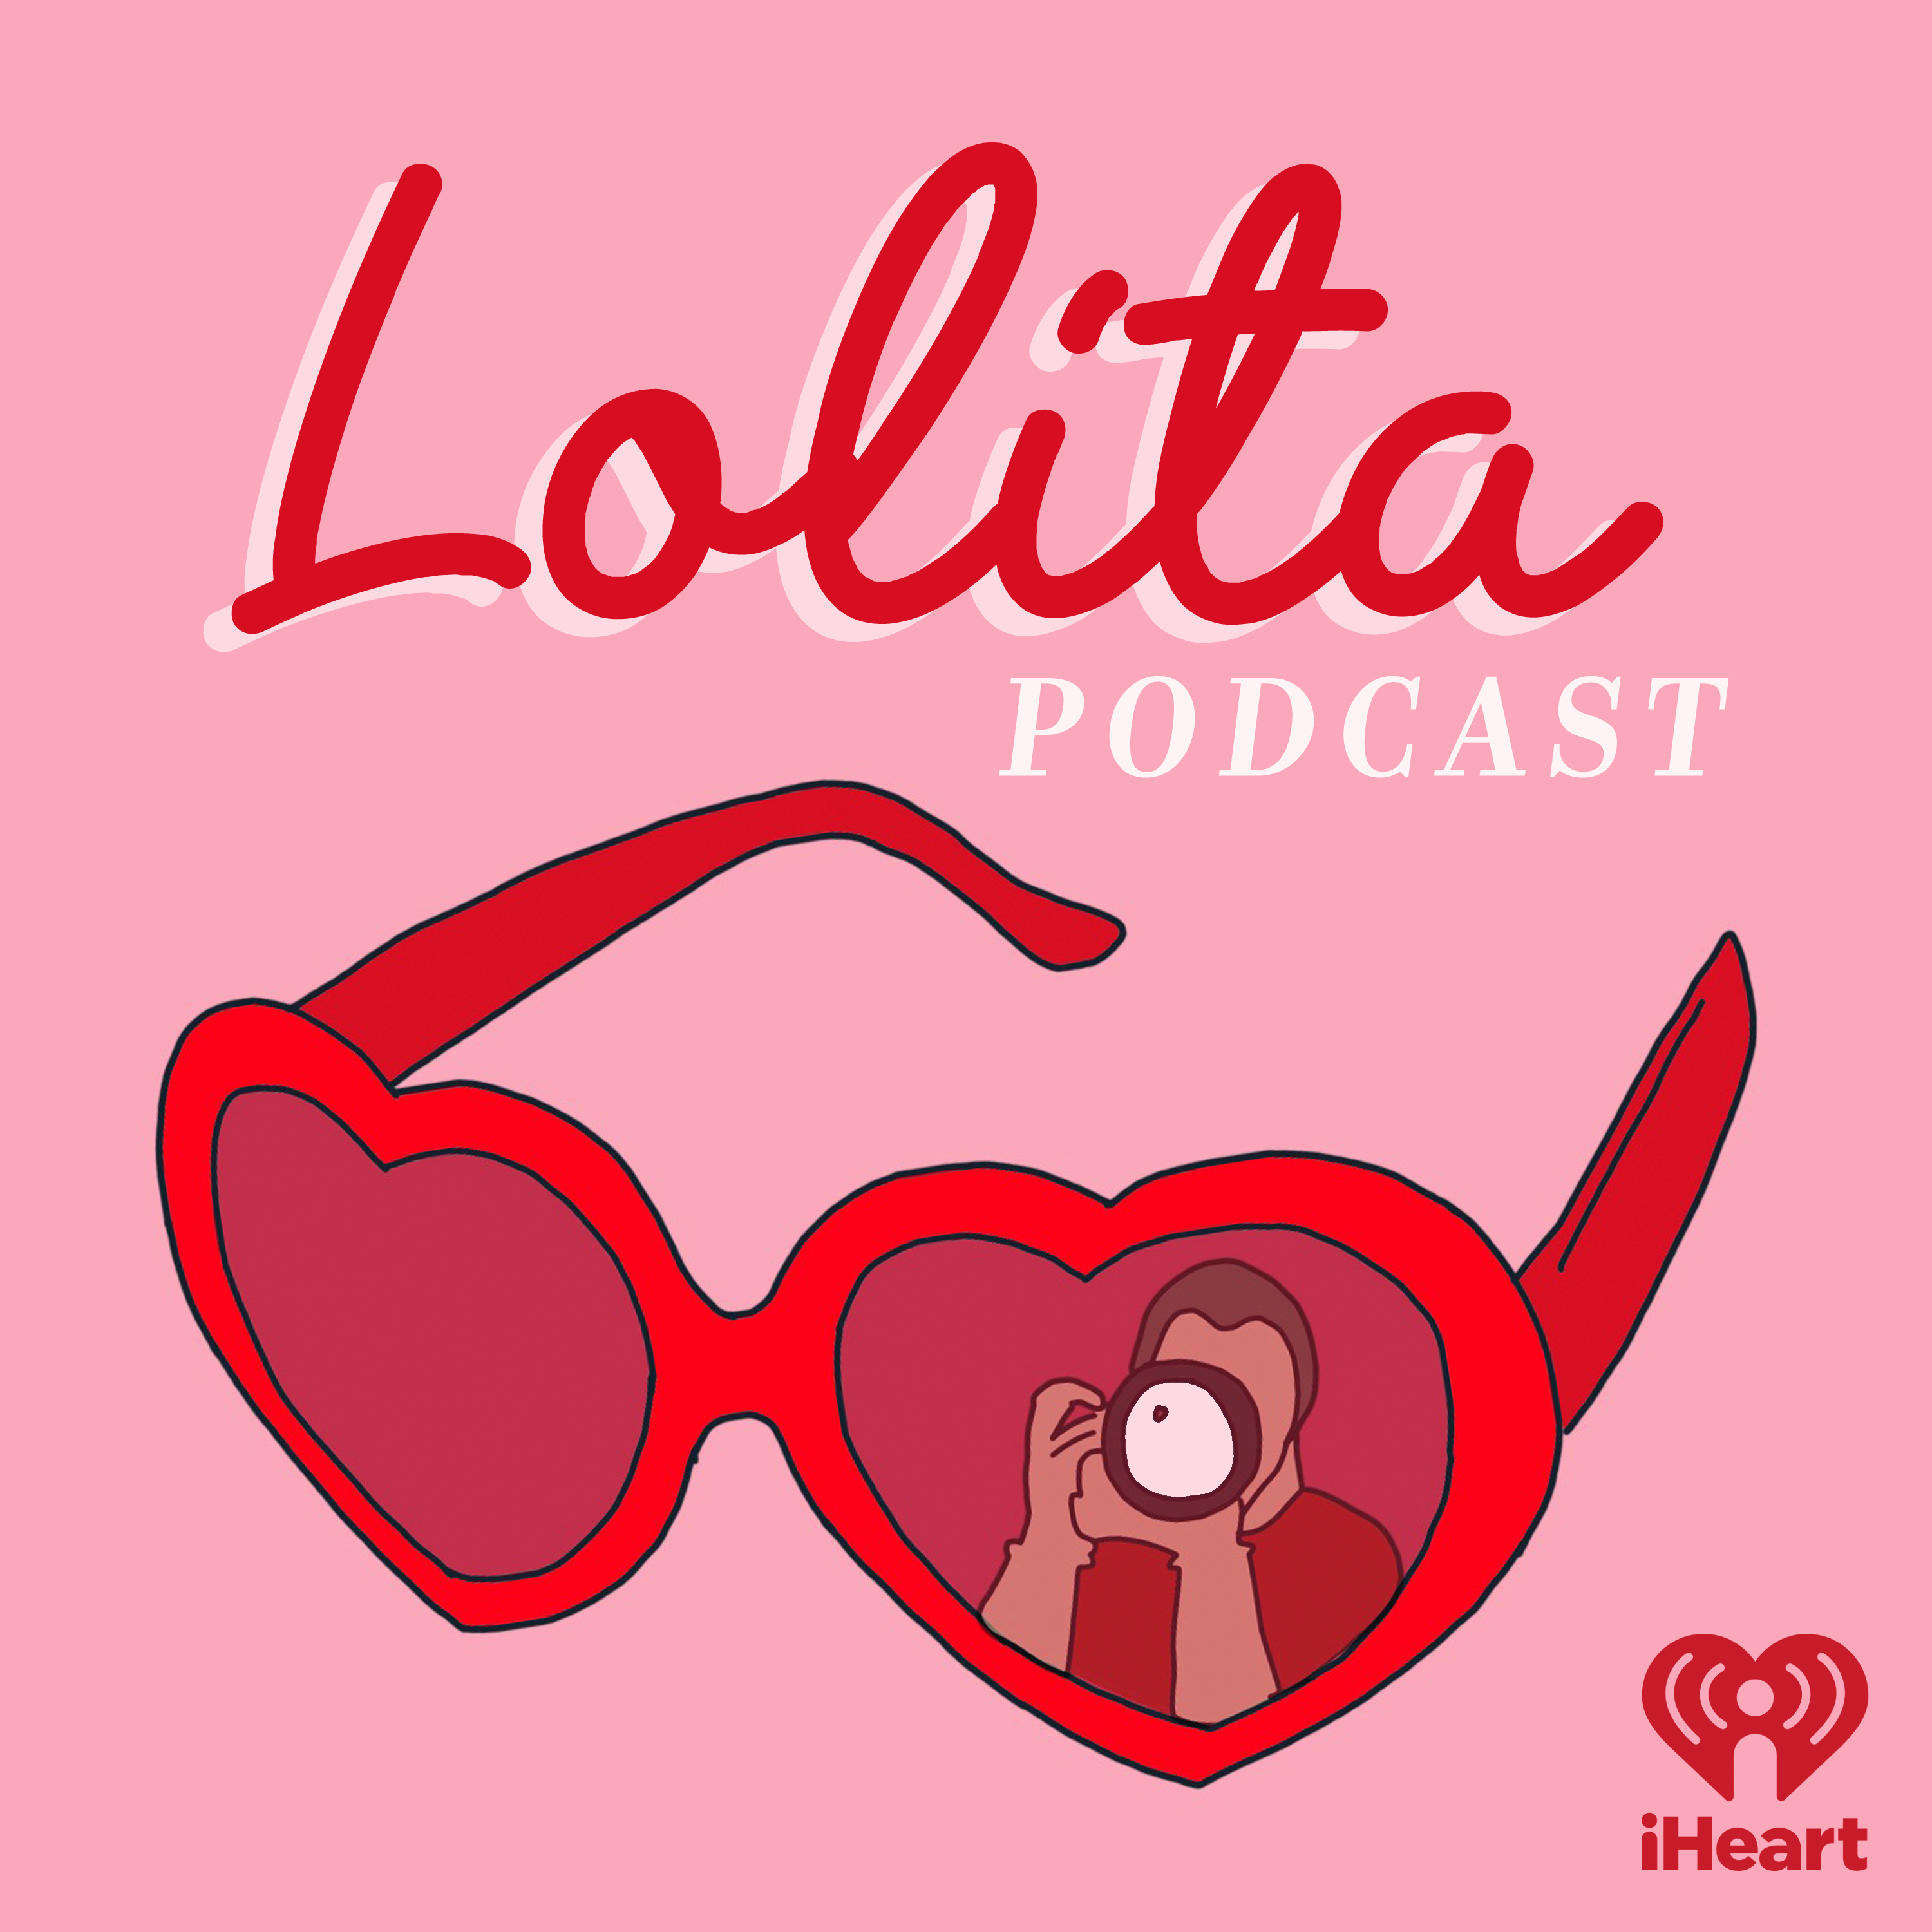 7 (Part 1): That Time David Mamet Wrote a Draft of Lolita (And Other Hollywood Tragedies)